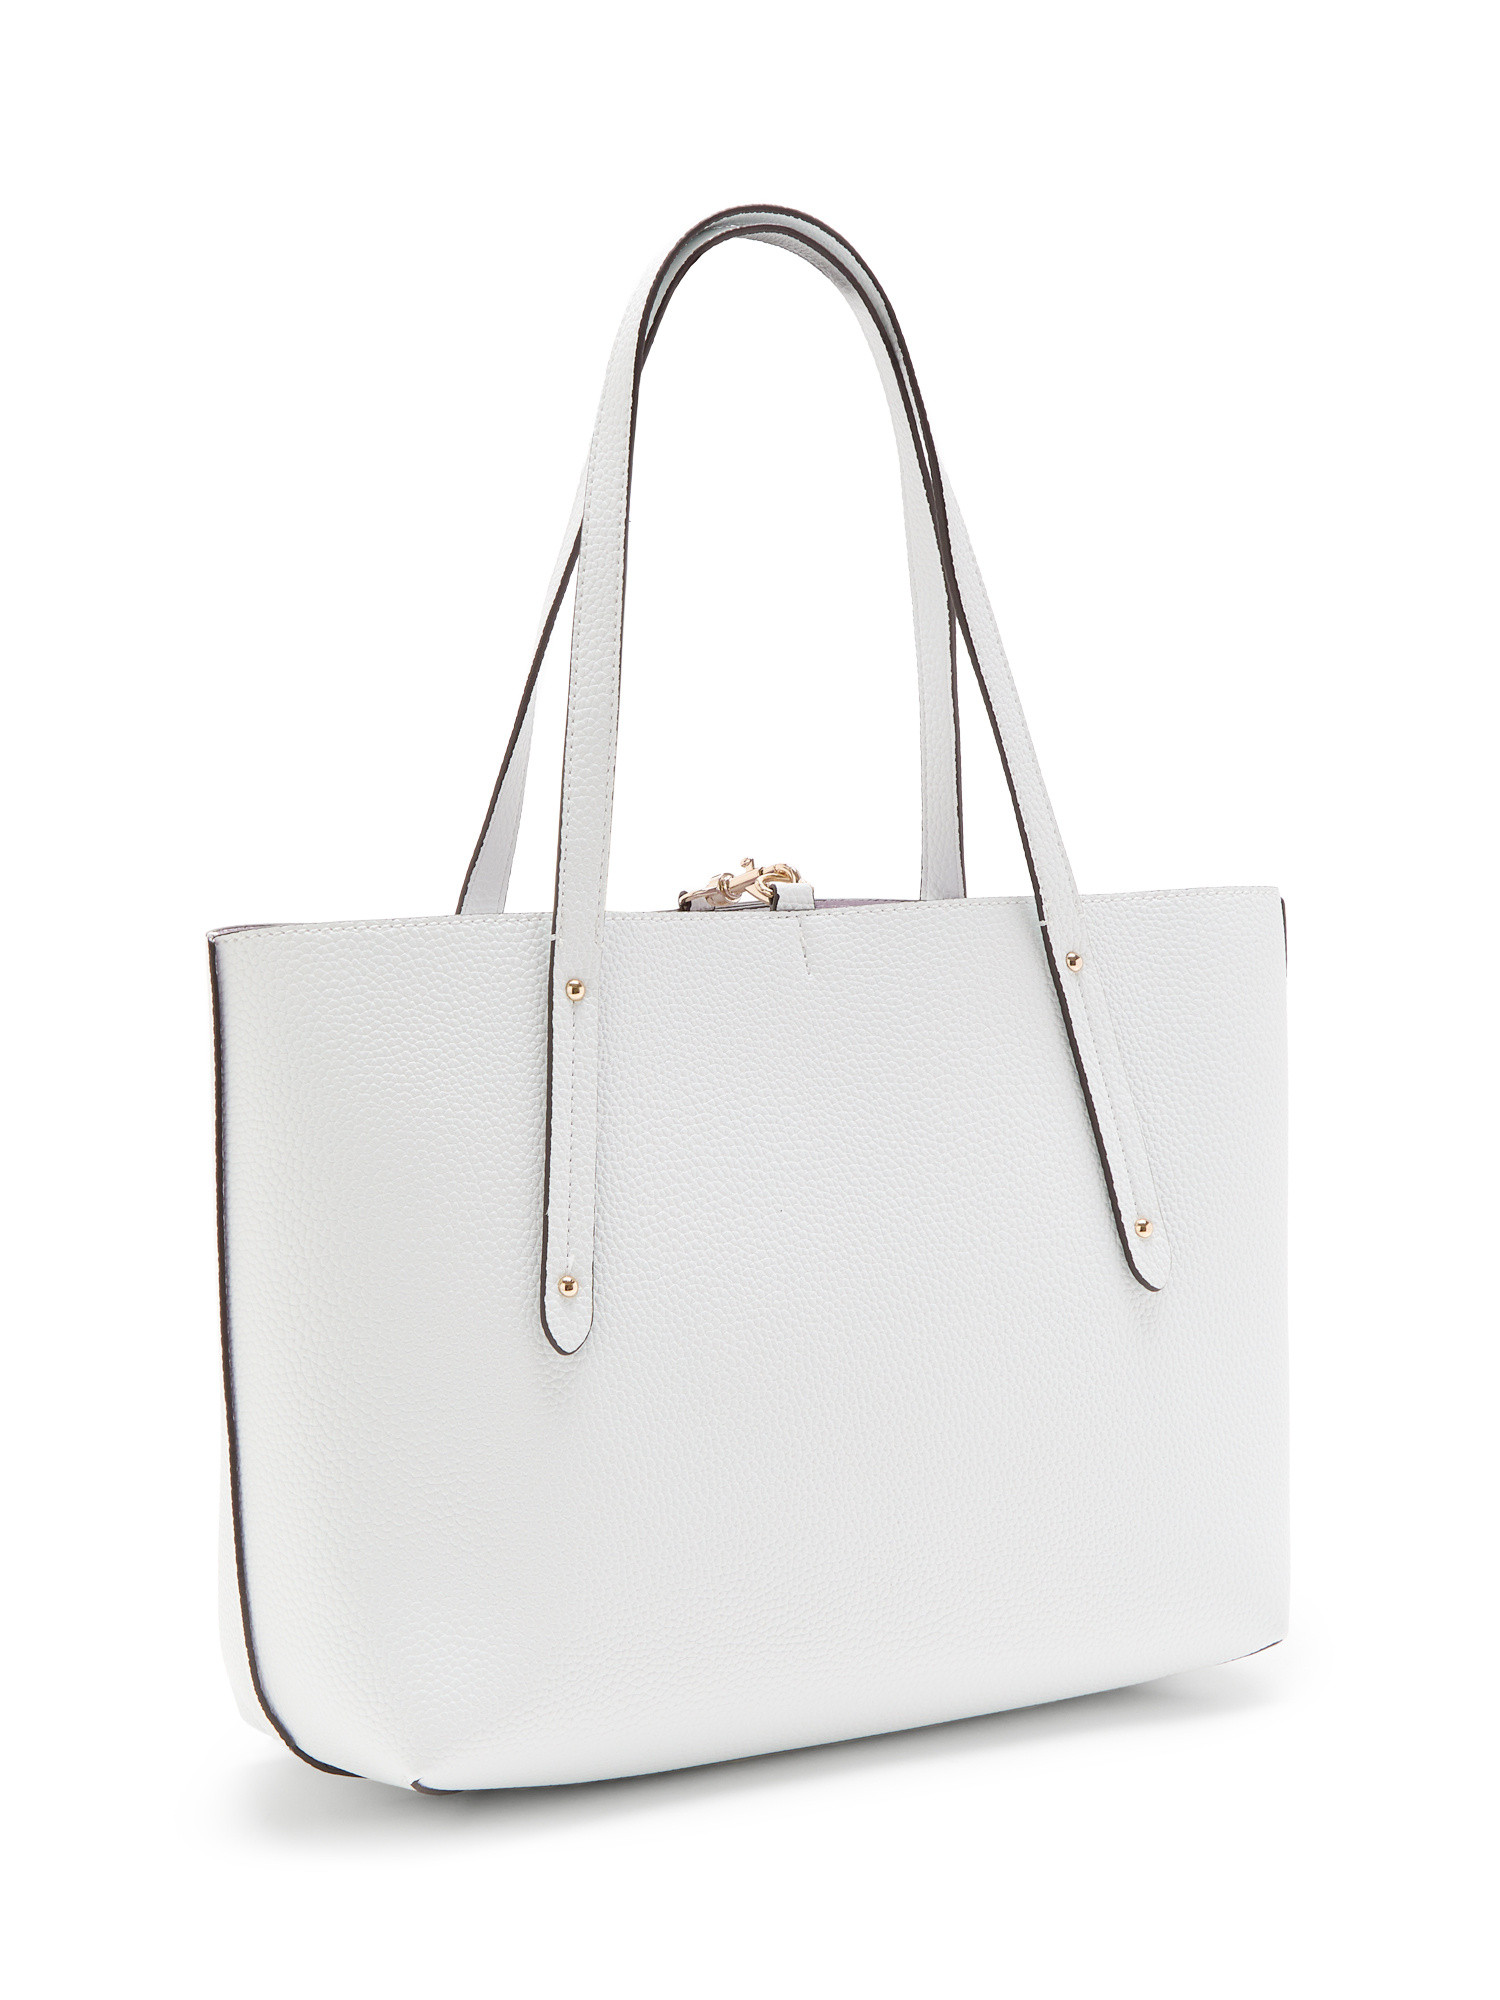 Guess - Brenton eco shopper, White, large image number 1